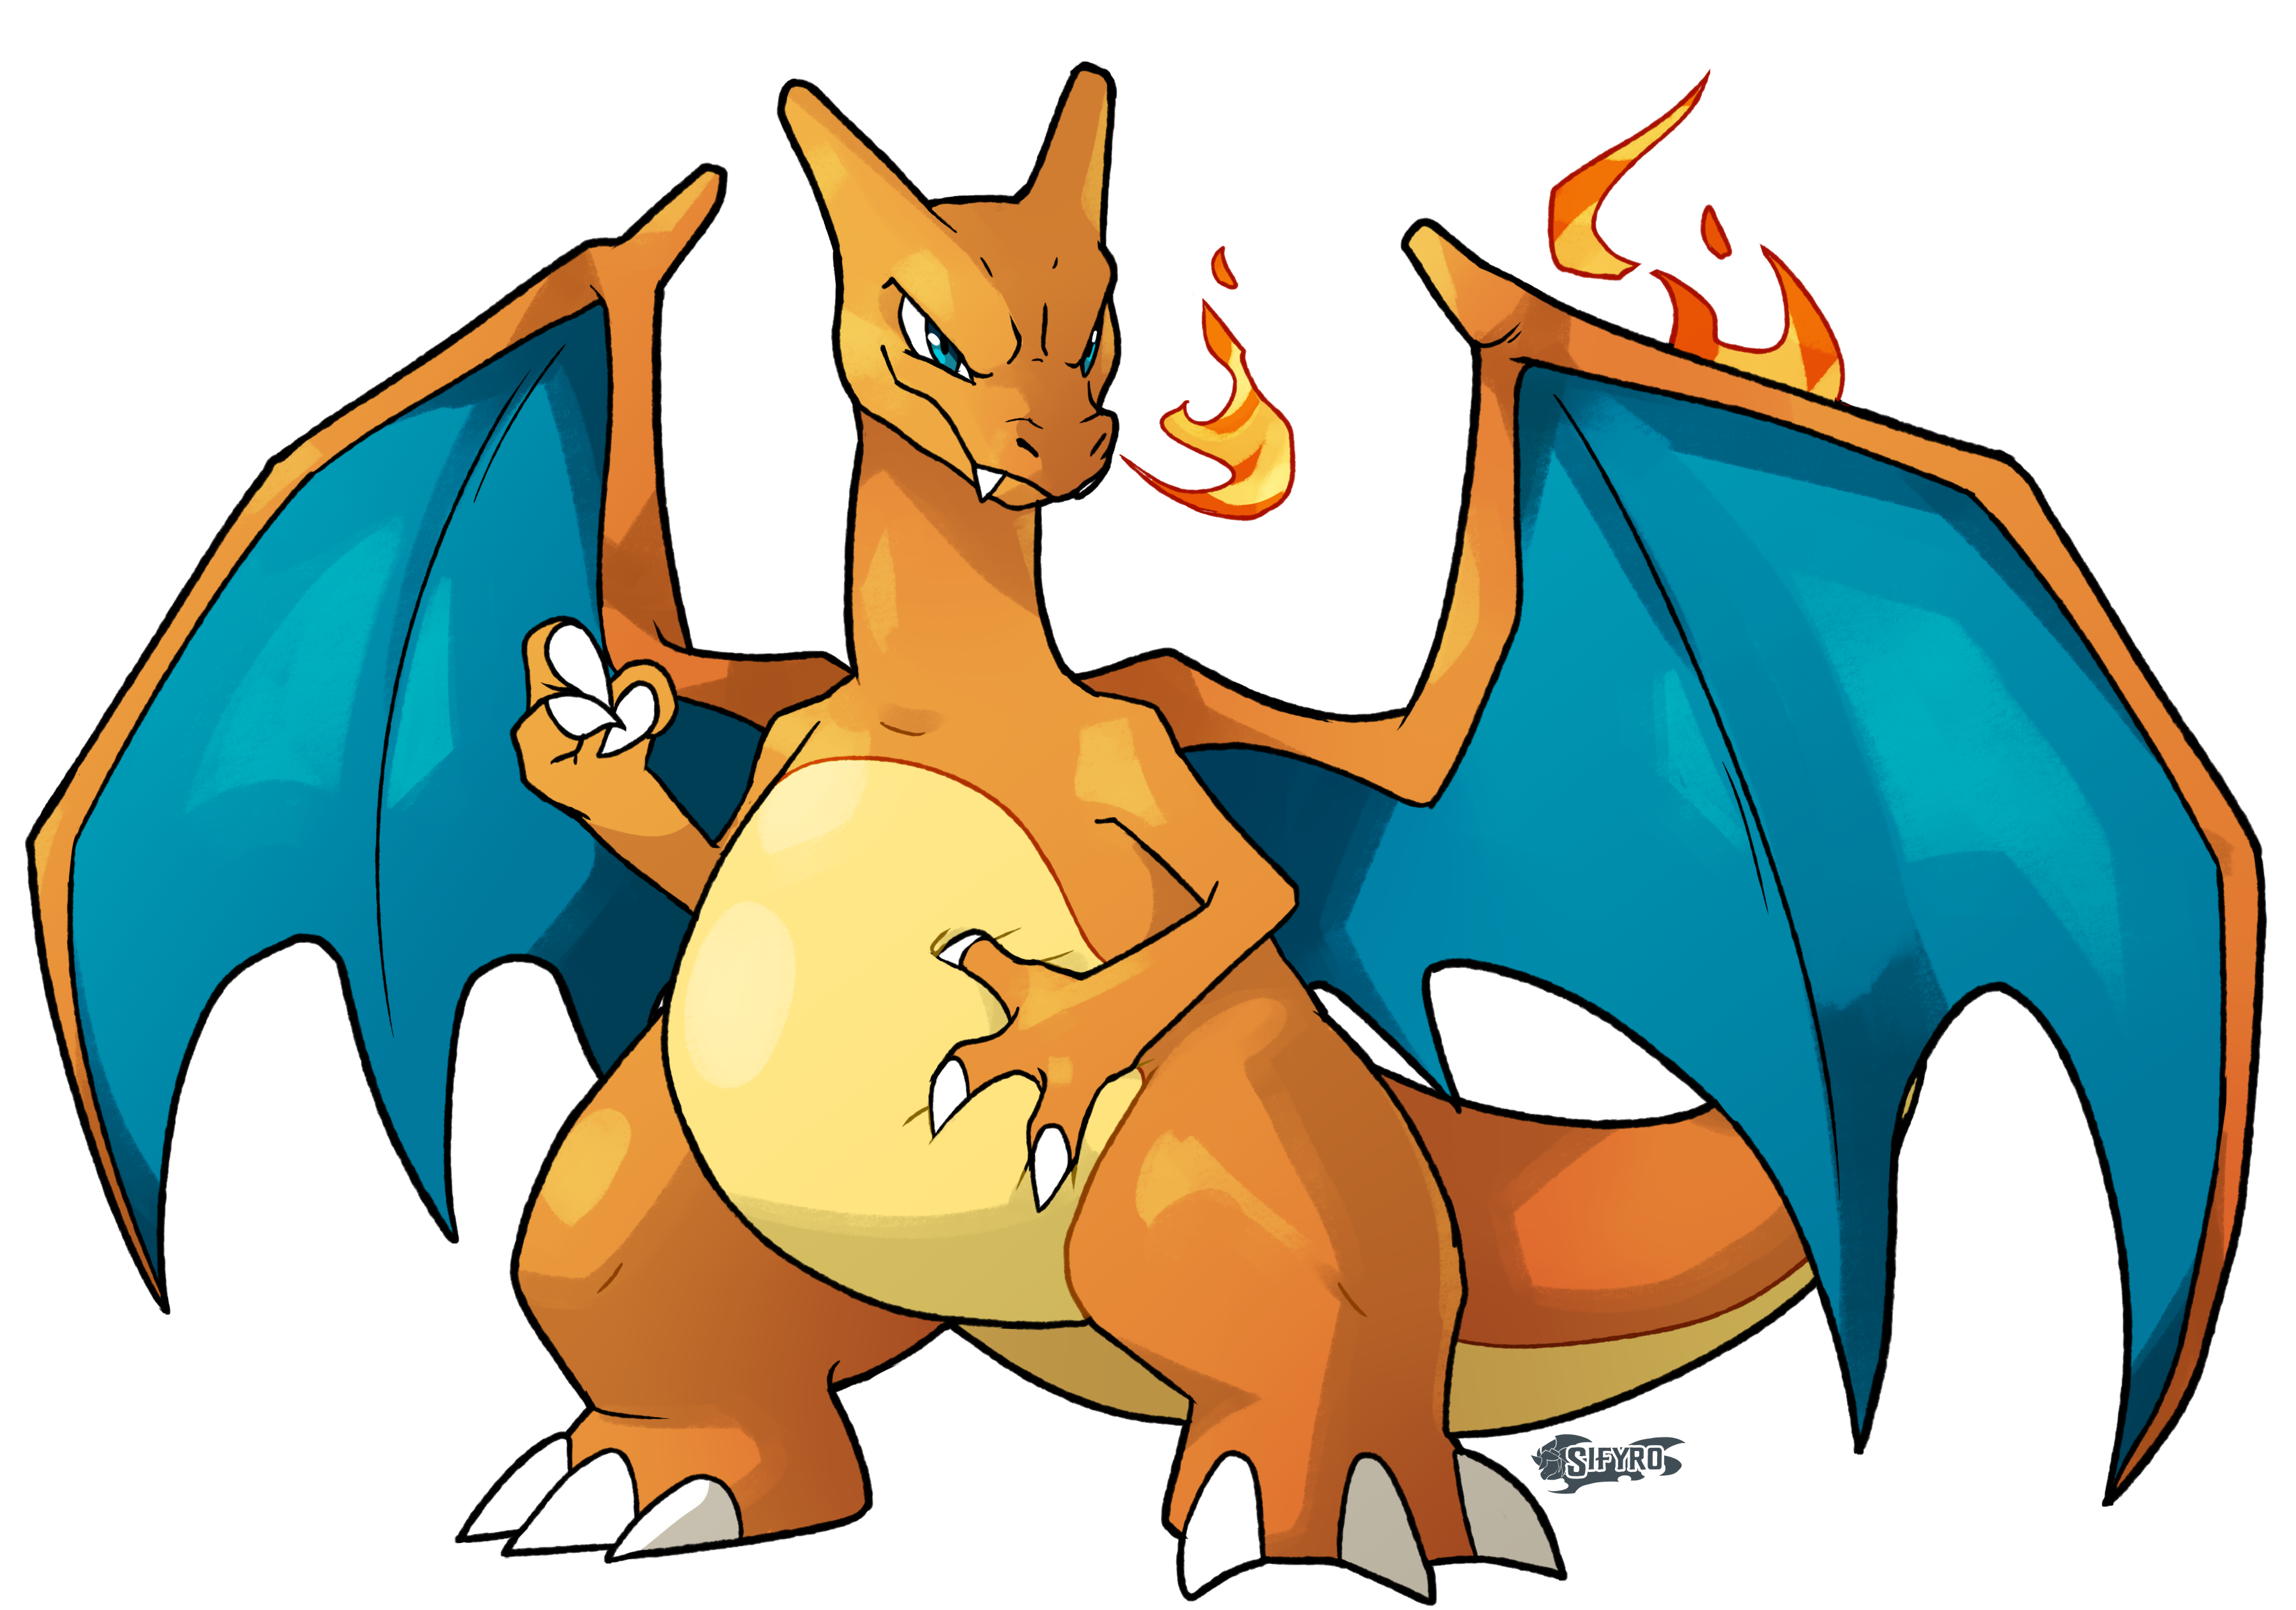 This charizard is T H I C C by. 